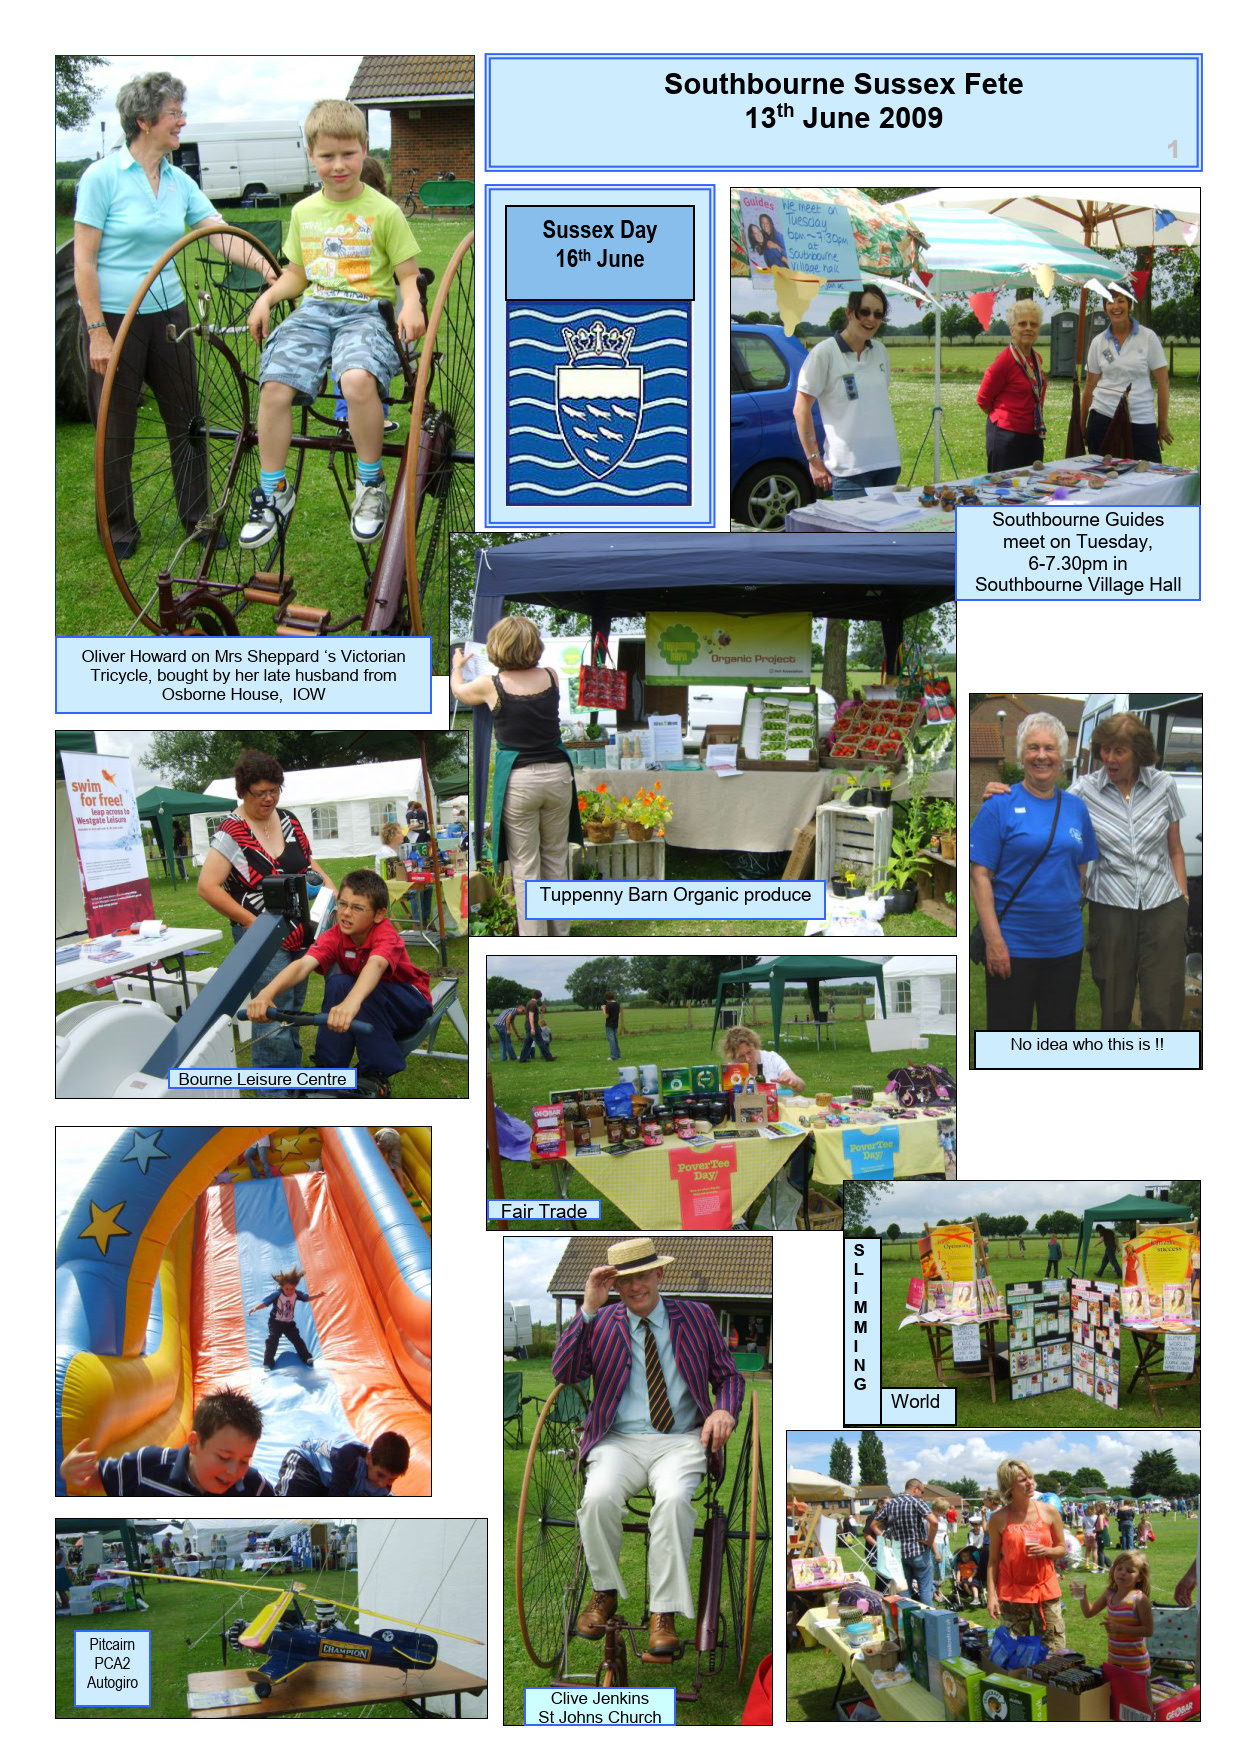 Southbourne's first Sussex Day in 2009 organised by the Parish Council on the recreation ground.